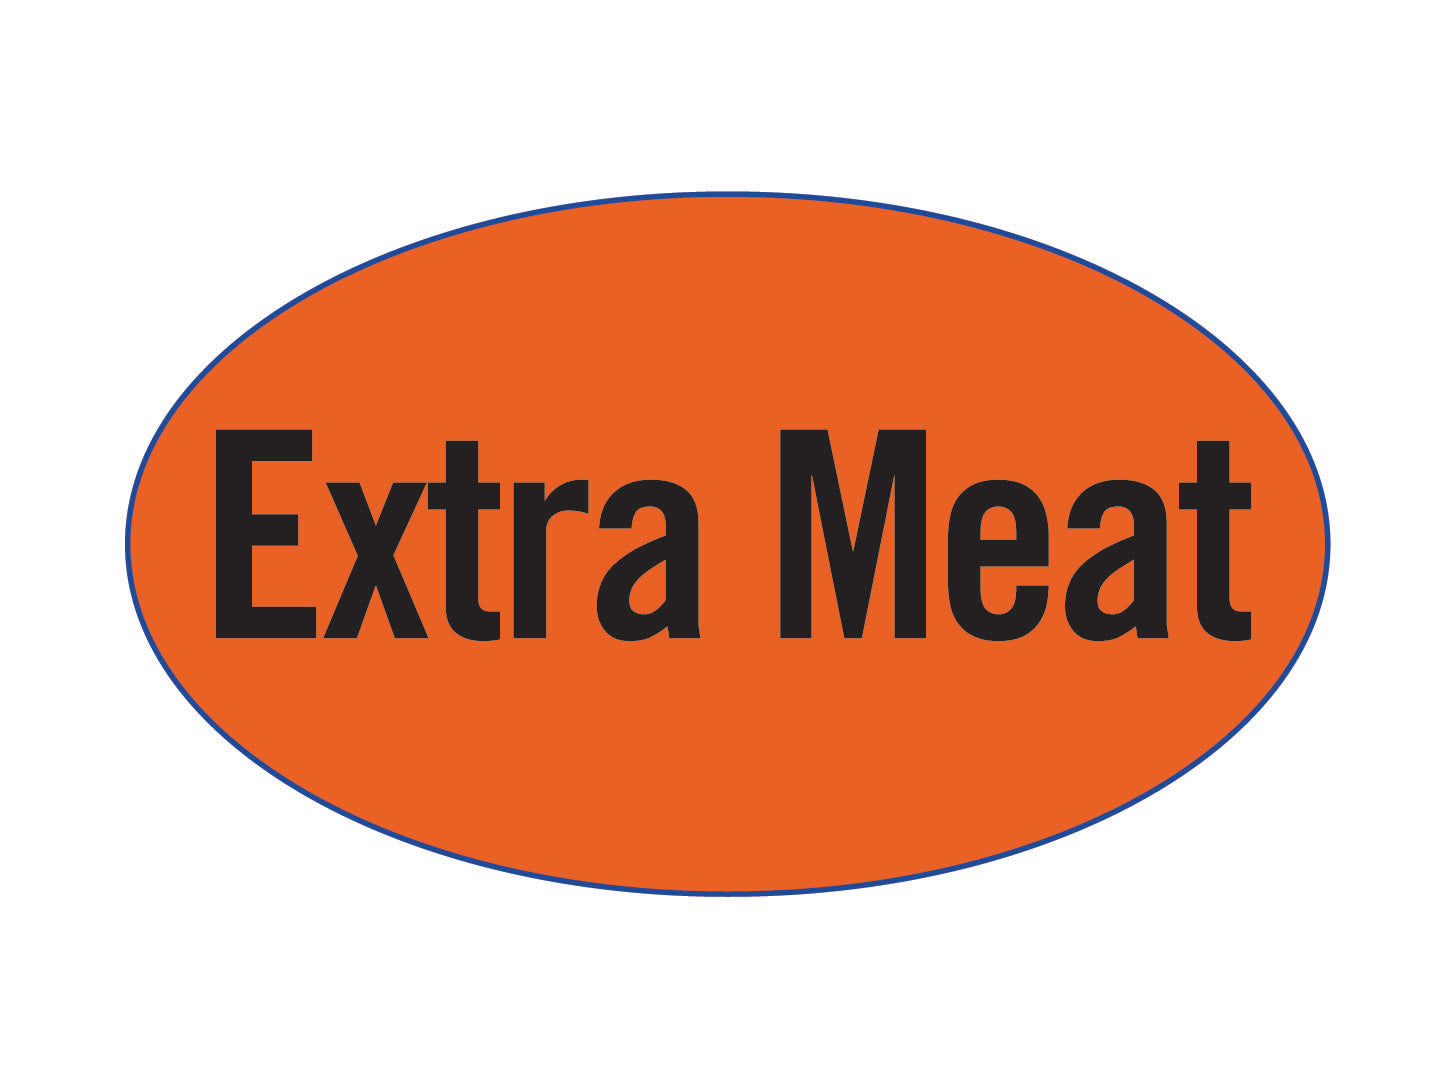 Extra Meat